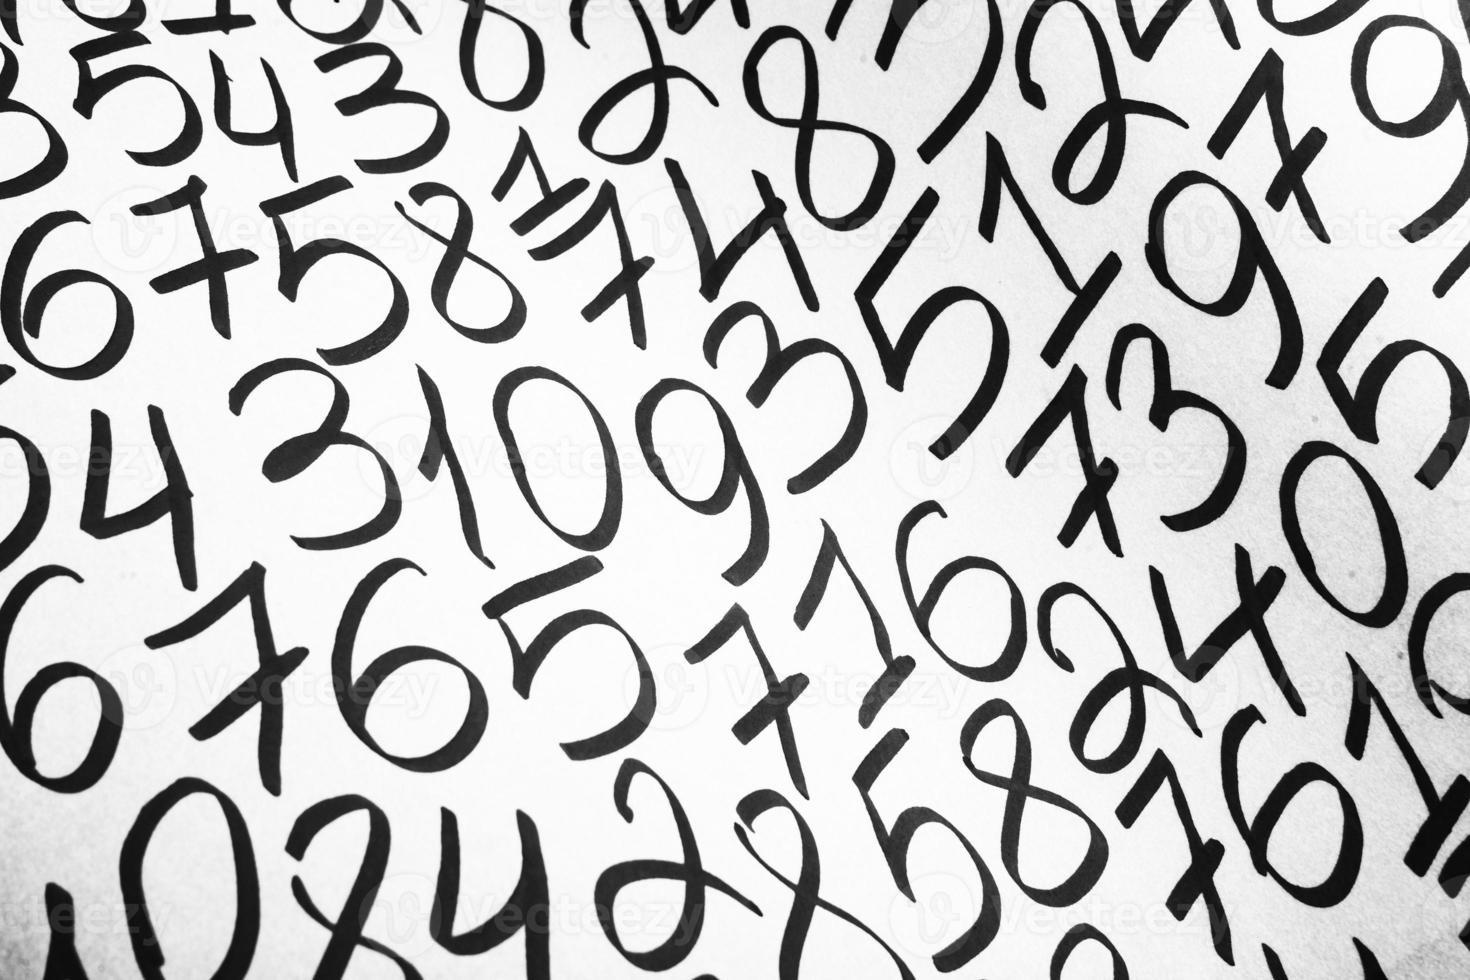 Numbers texture abstraction. Global economy crisis concept. Finance data or education concept. photo